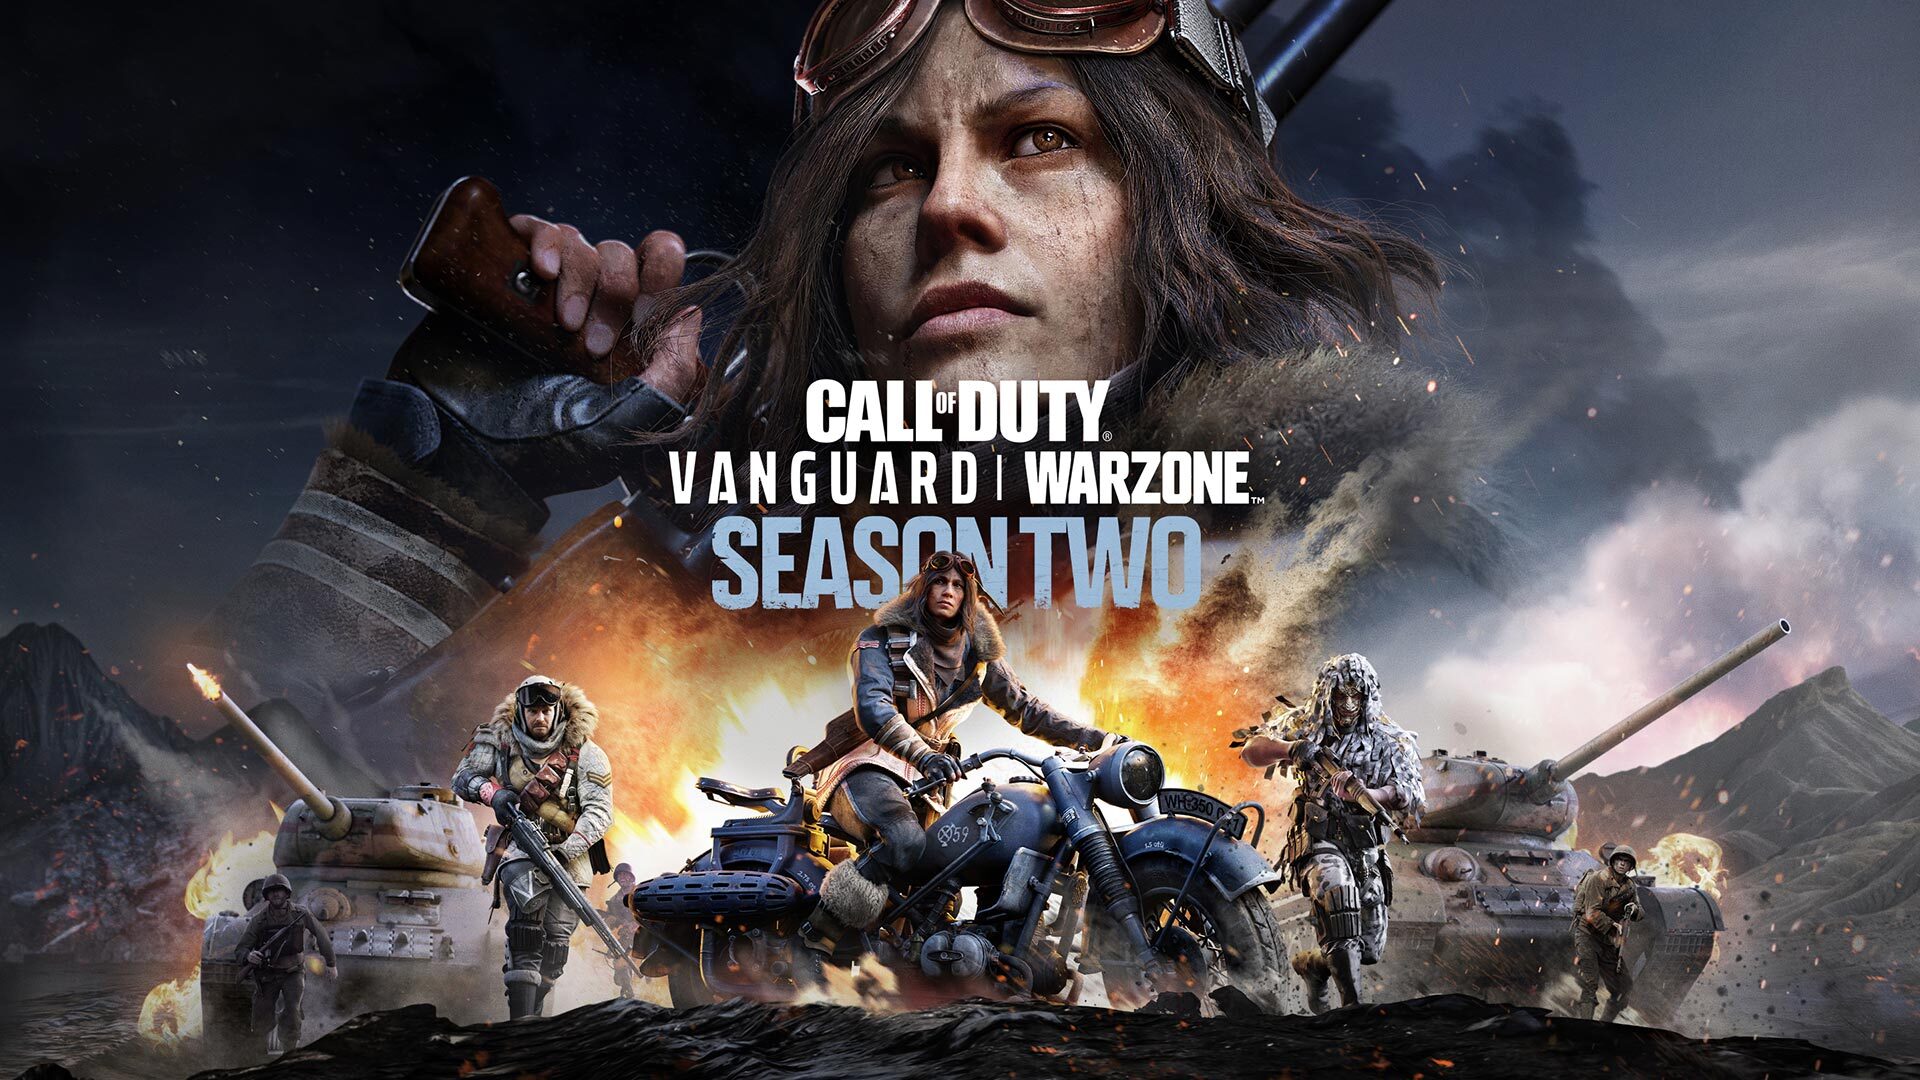 Duty call warzone of COD: Warzone